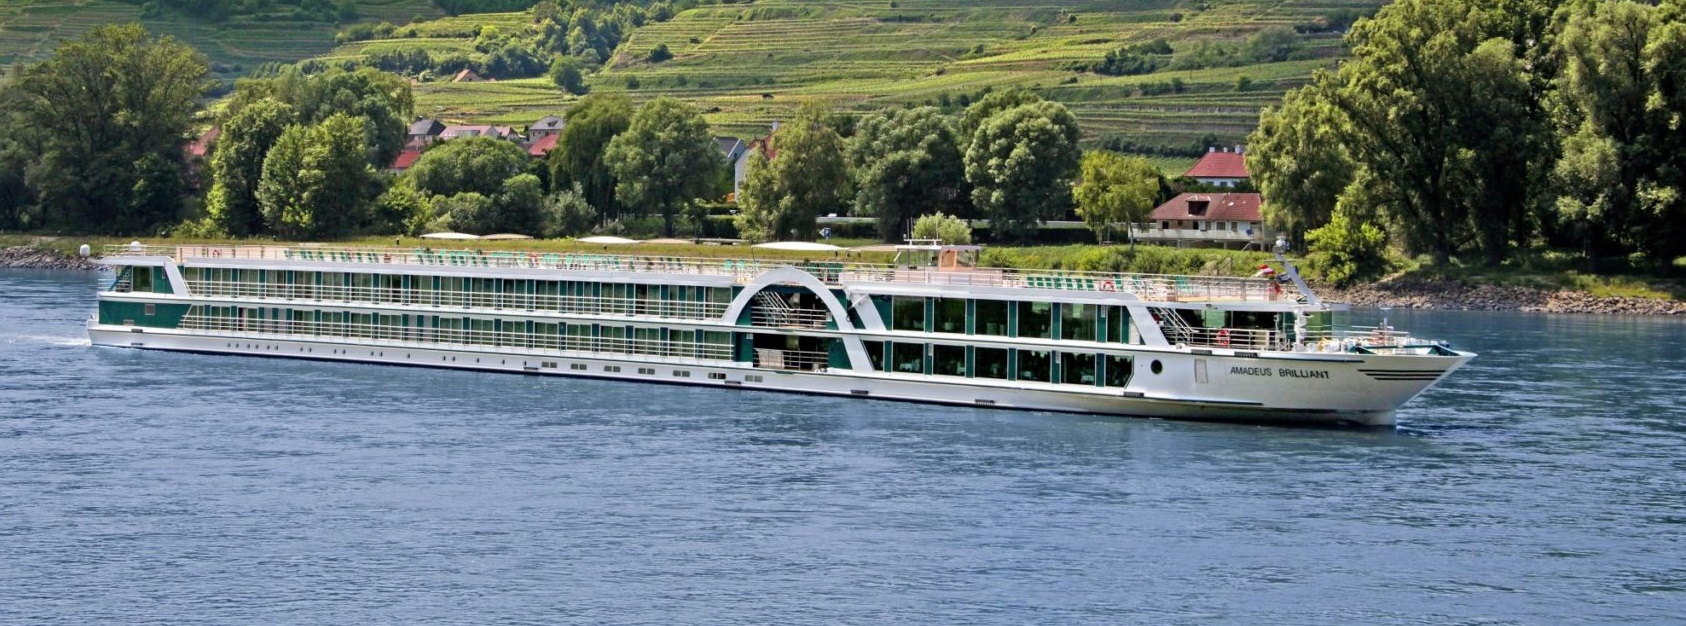 Let's look at the best 2020 Amadeus River Cruises